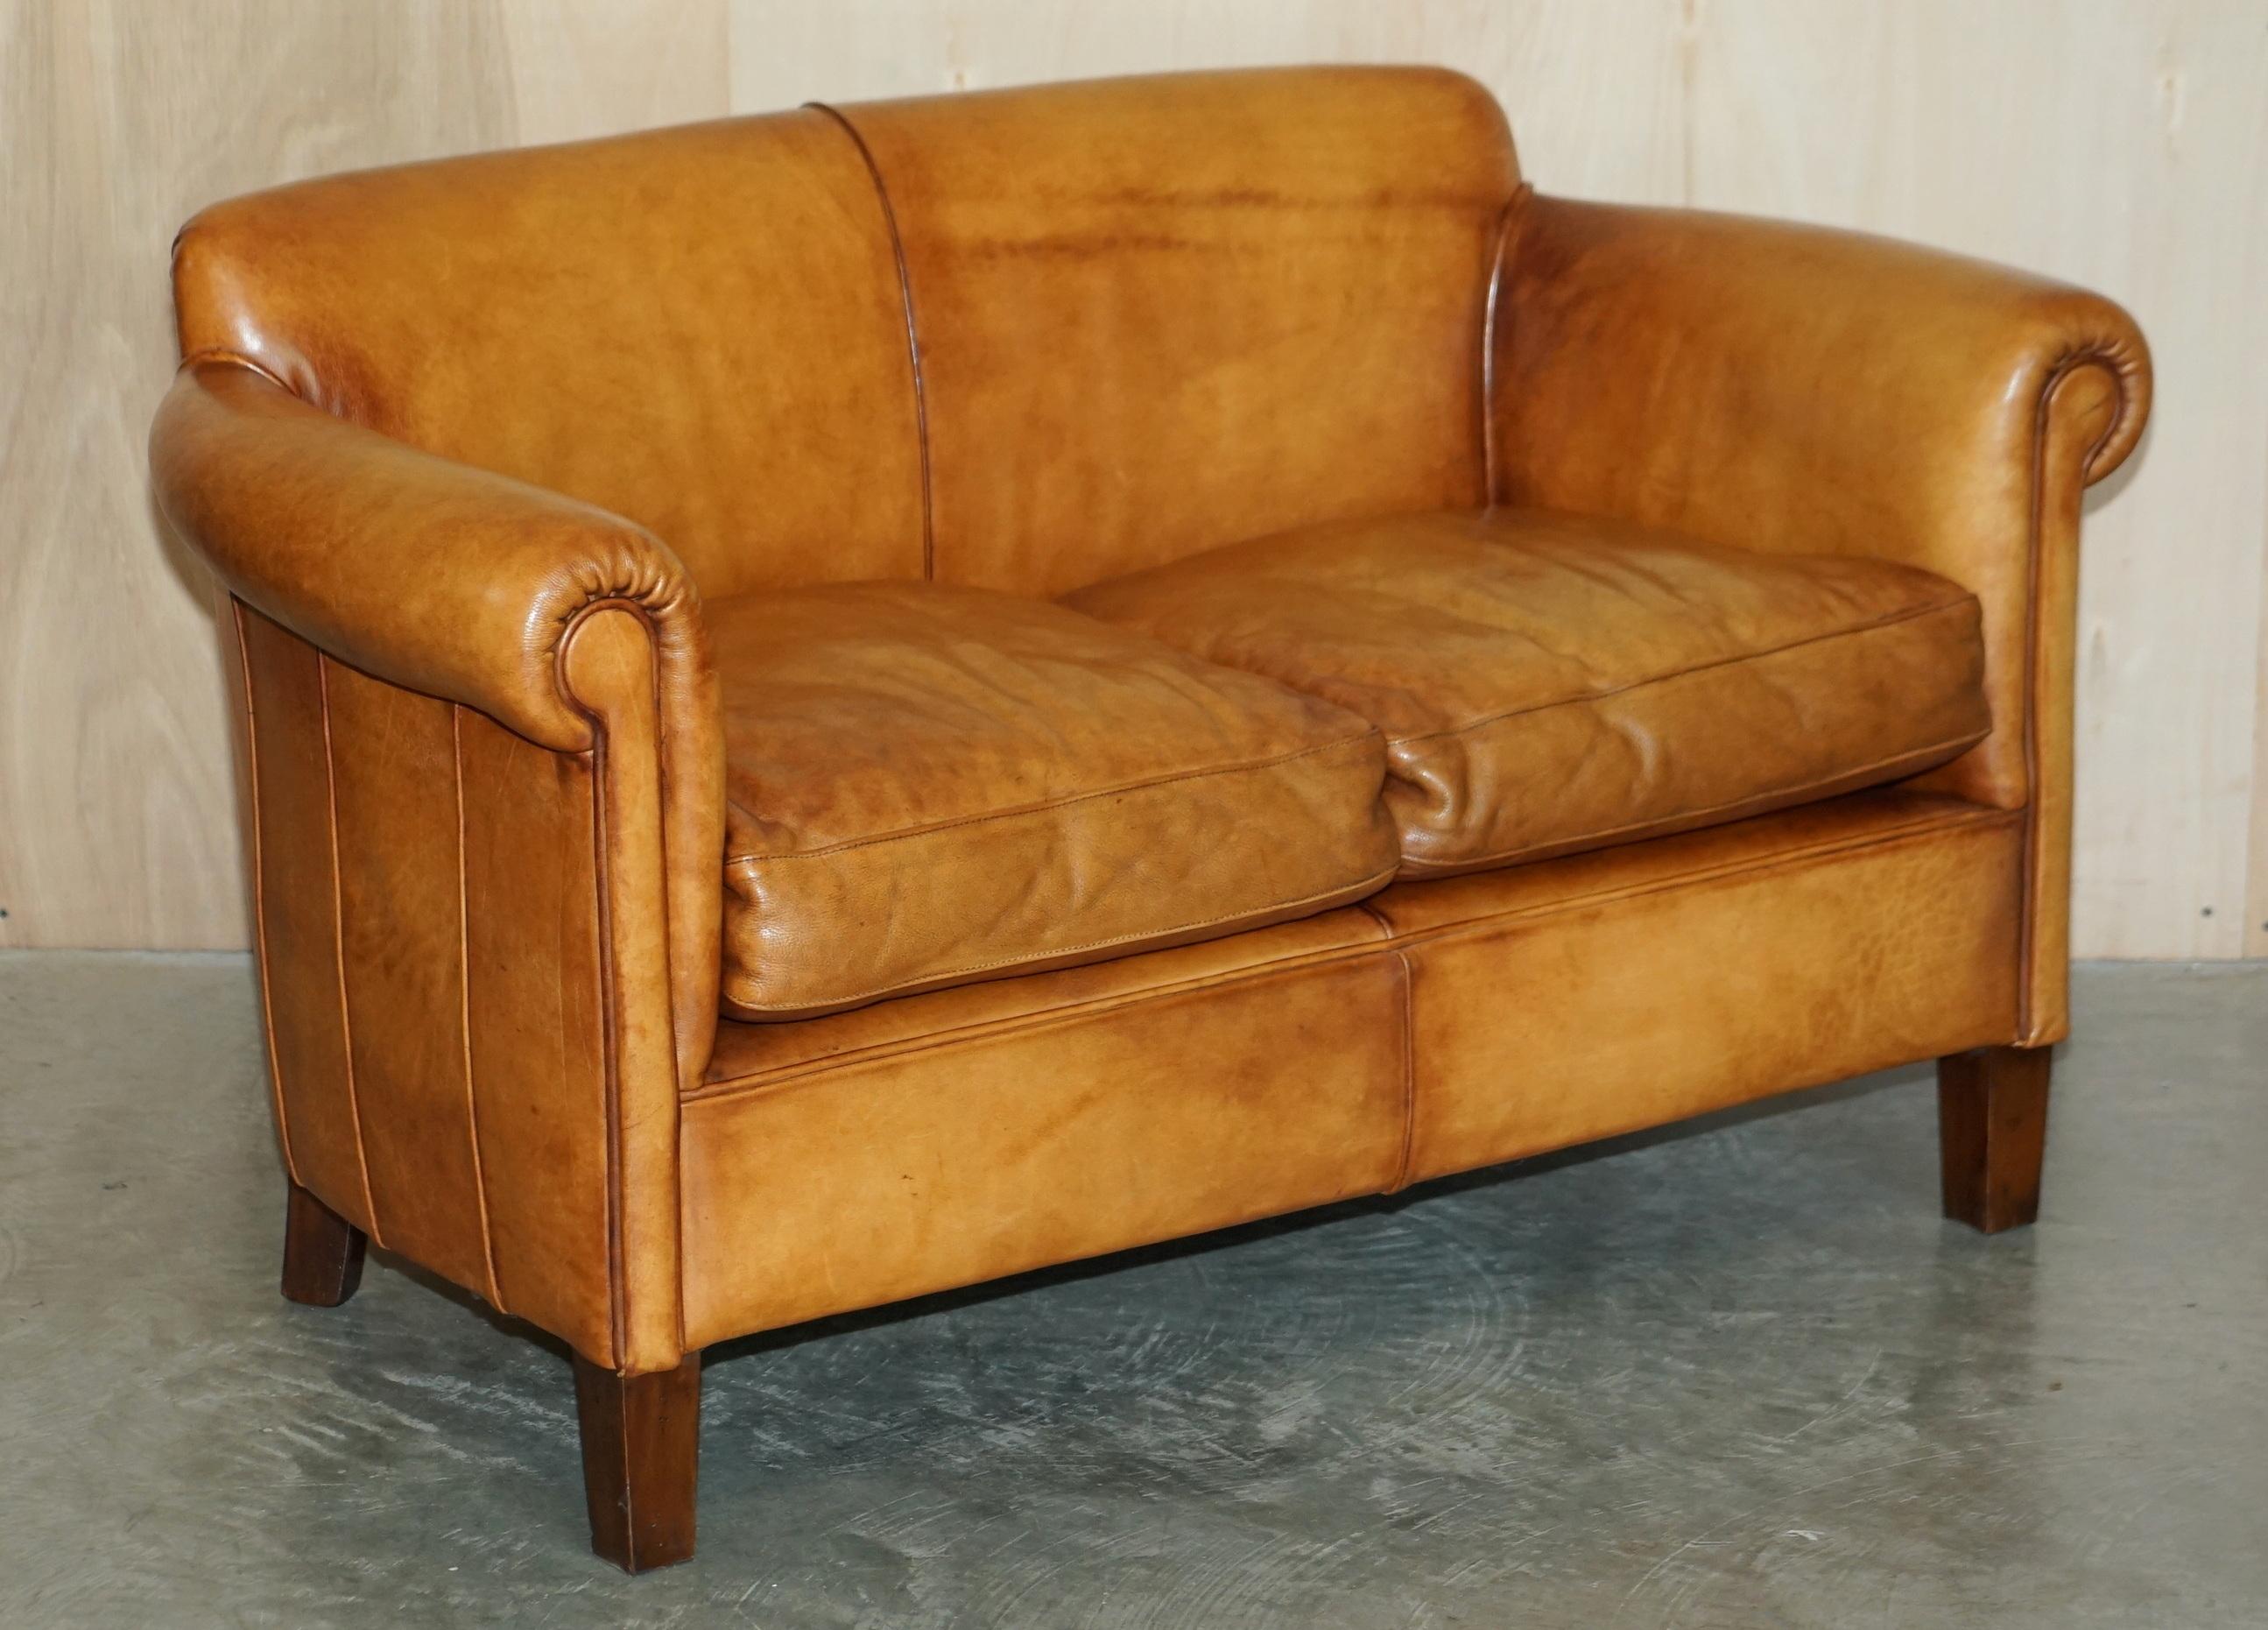 Rare John Lewis Camford Heritage Brown Leather Armchair & Two Seat Sofa Suite For Sale 1